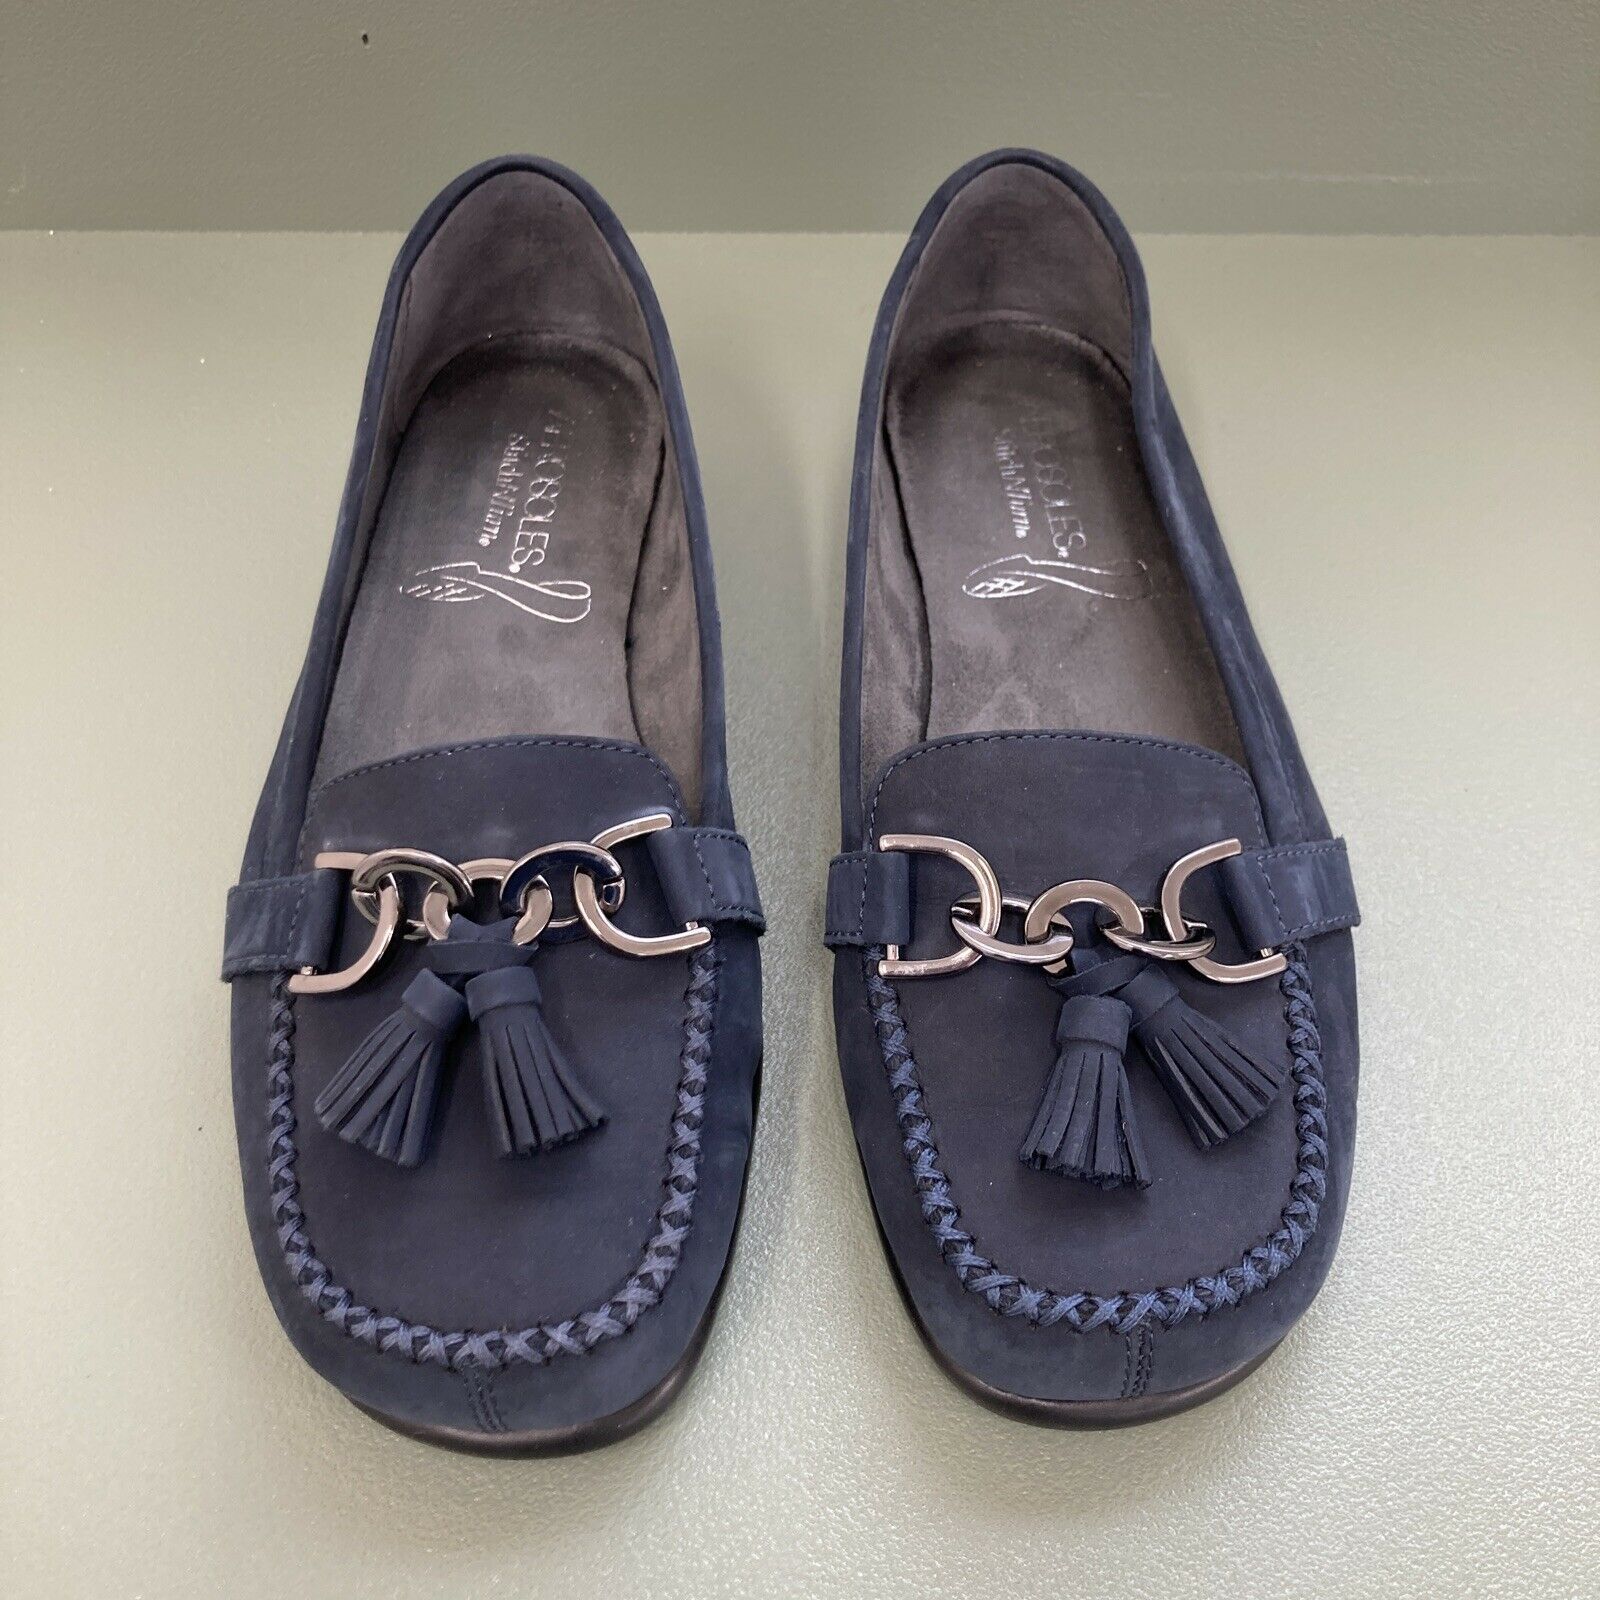 Aerosoles Stitch N Turn Womens Leather Loafers Shoes Size 8 Navy Blue Tassle